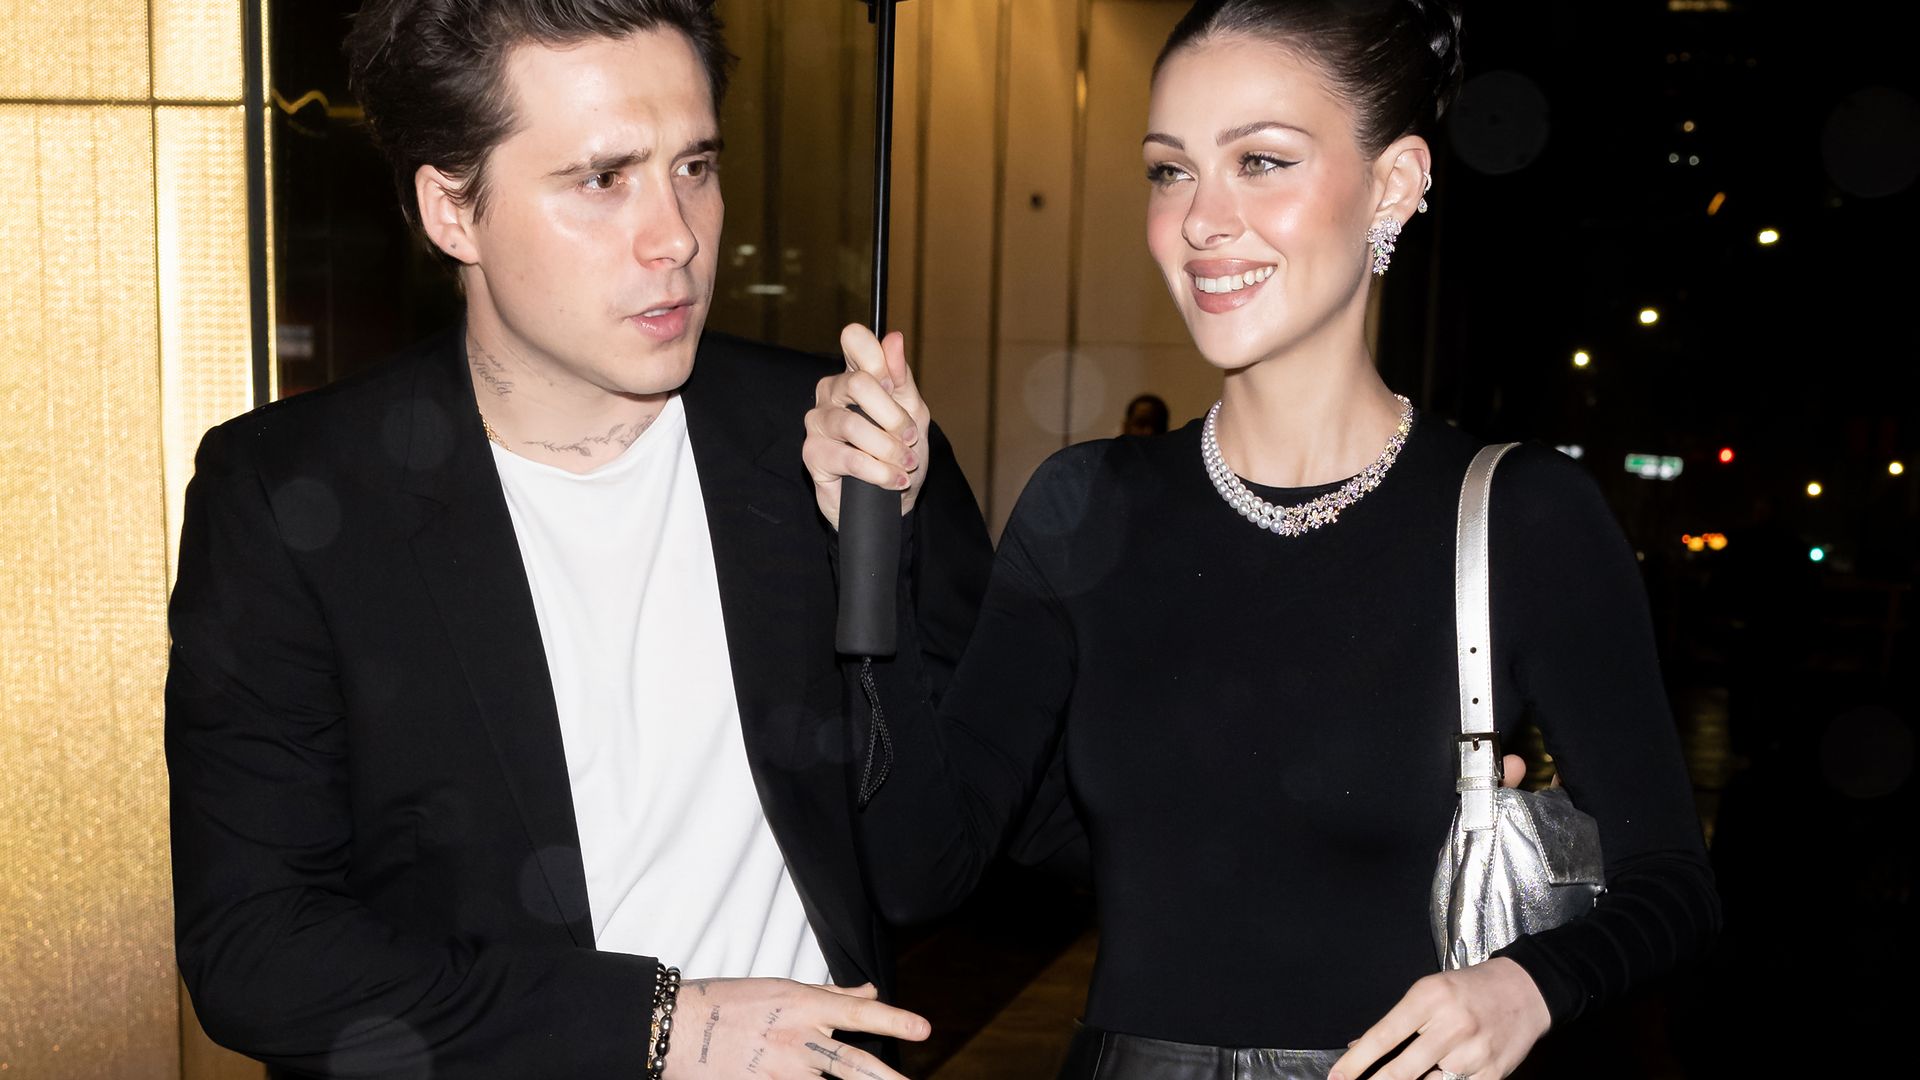 NEW YORK, NEW YORK - APRIL 29: Brooklyn Beckham and actress Nicola Peltz are seen leaving the Mikimoto 130th Anniversary Party at Central Park Tower on April 29, 2023 in New York City. (Photo by Gilbert Carrasquillo/GC Images)